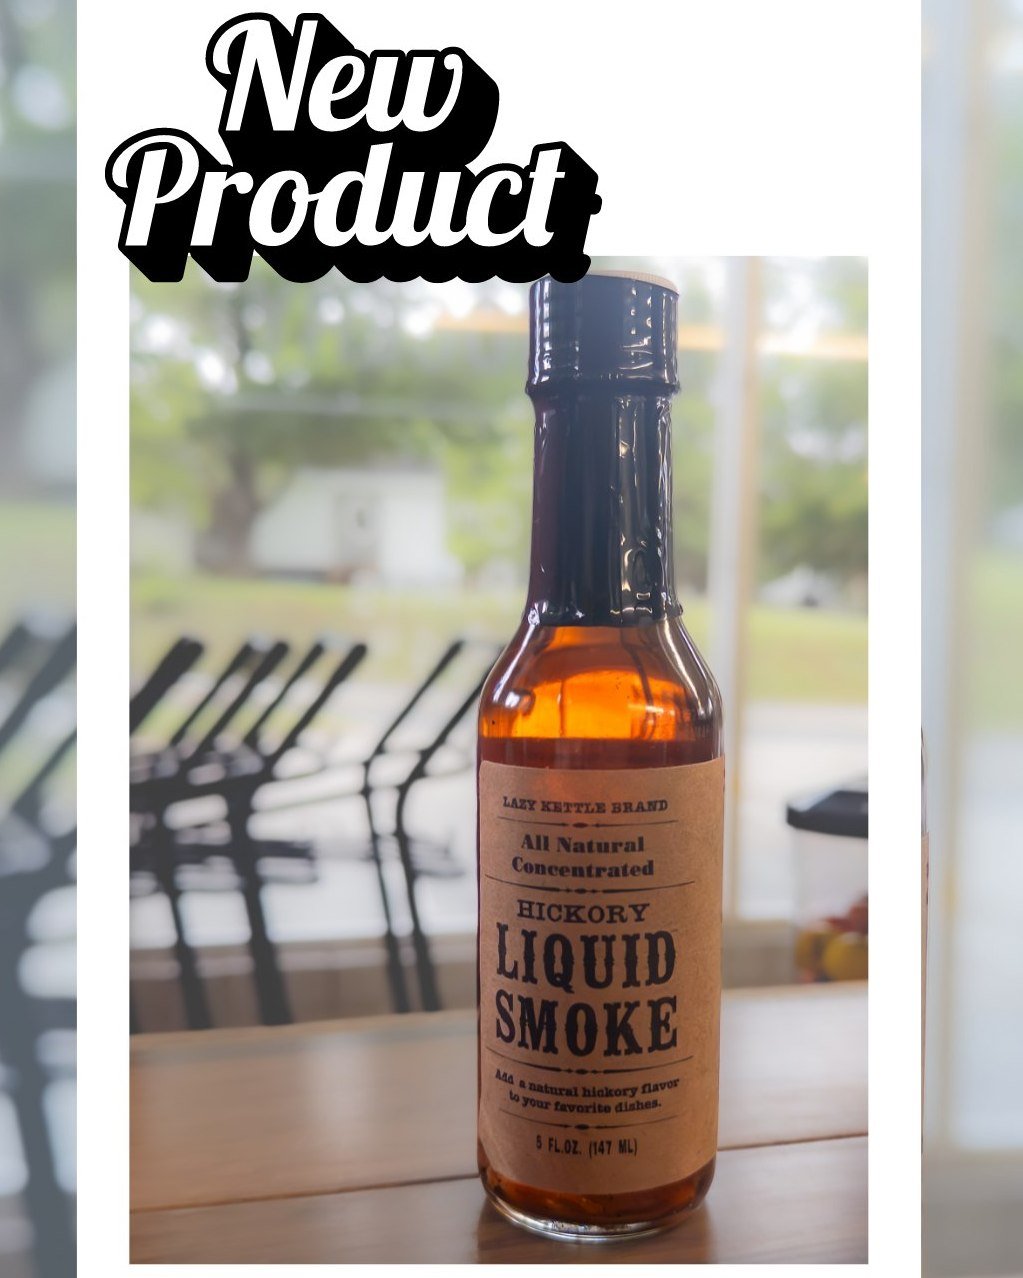 NEW PRODUCT ALERT!!! Hickory Liquid Smoke from Lazy Kettle Brand

&quot;We get so many questions about liquid smoke. Now, thanks to Lazy Kettle, we have the answer! This all-natural hickory liquid smoke contains no sodium, no soy sauce. Nothing artif